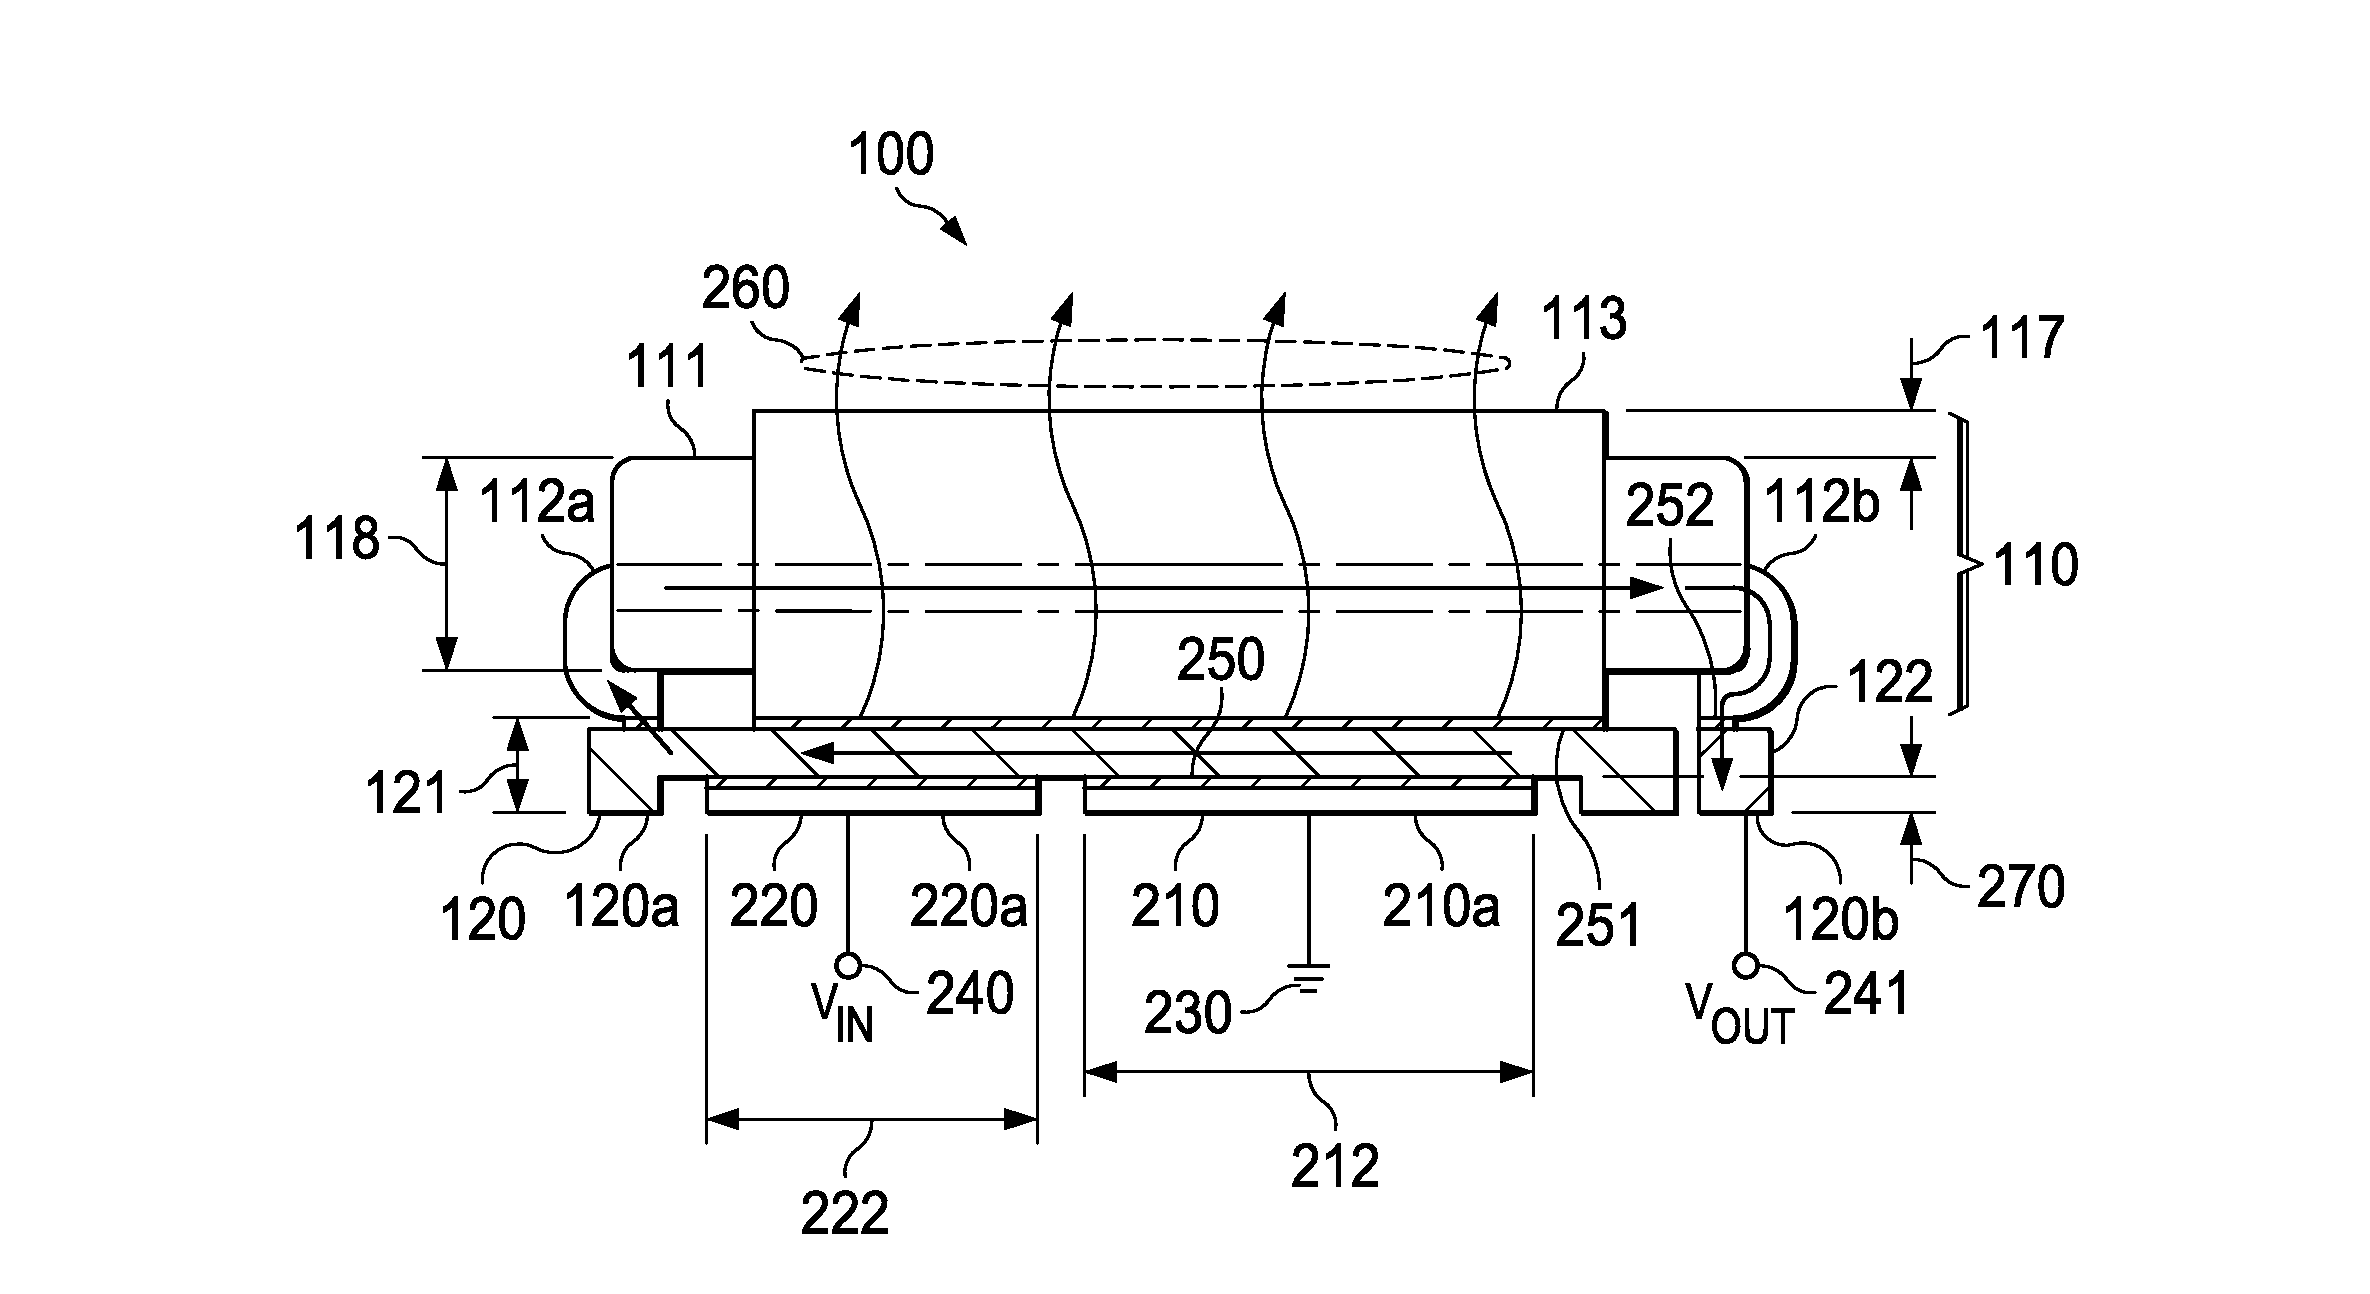 DC-DC Converter Vertically Integrated with Load Inductor Structured as Heat Sink